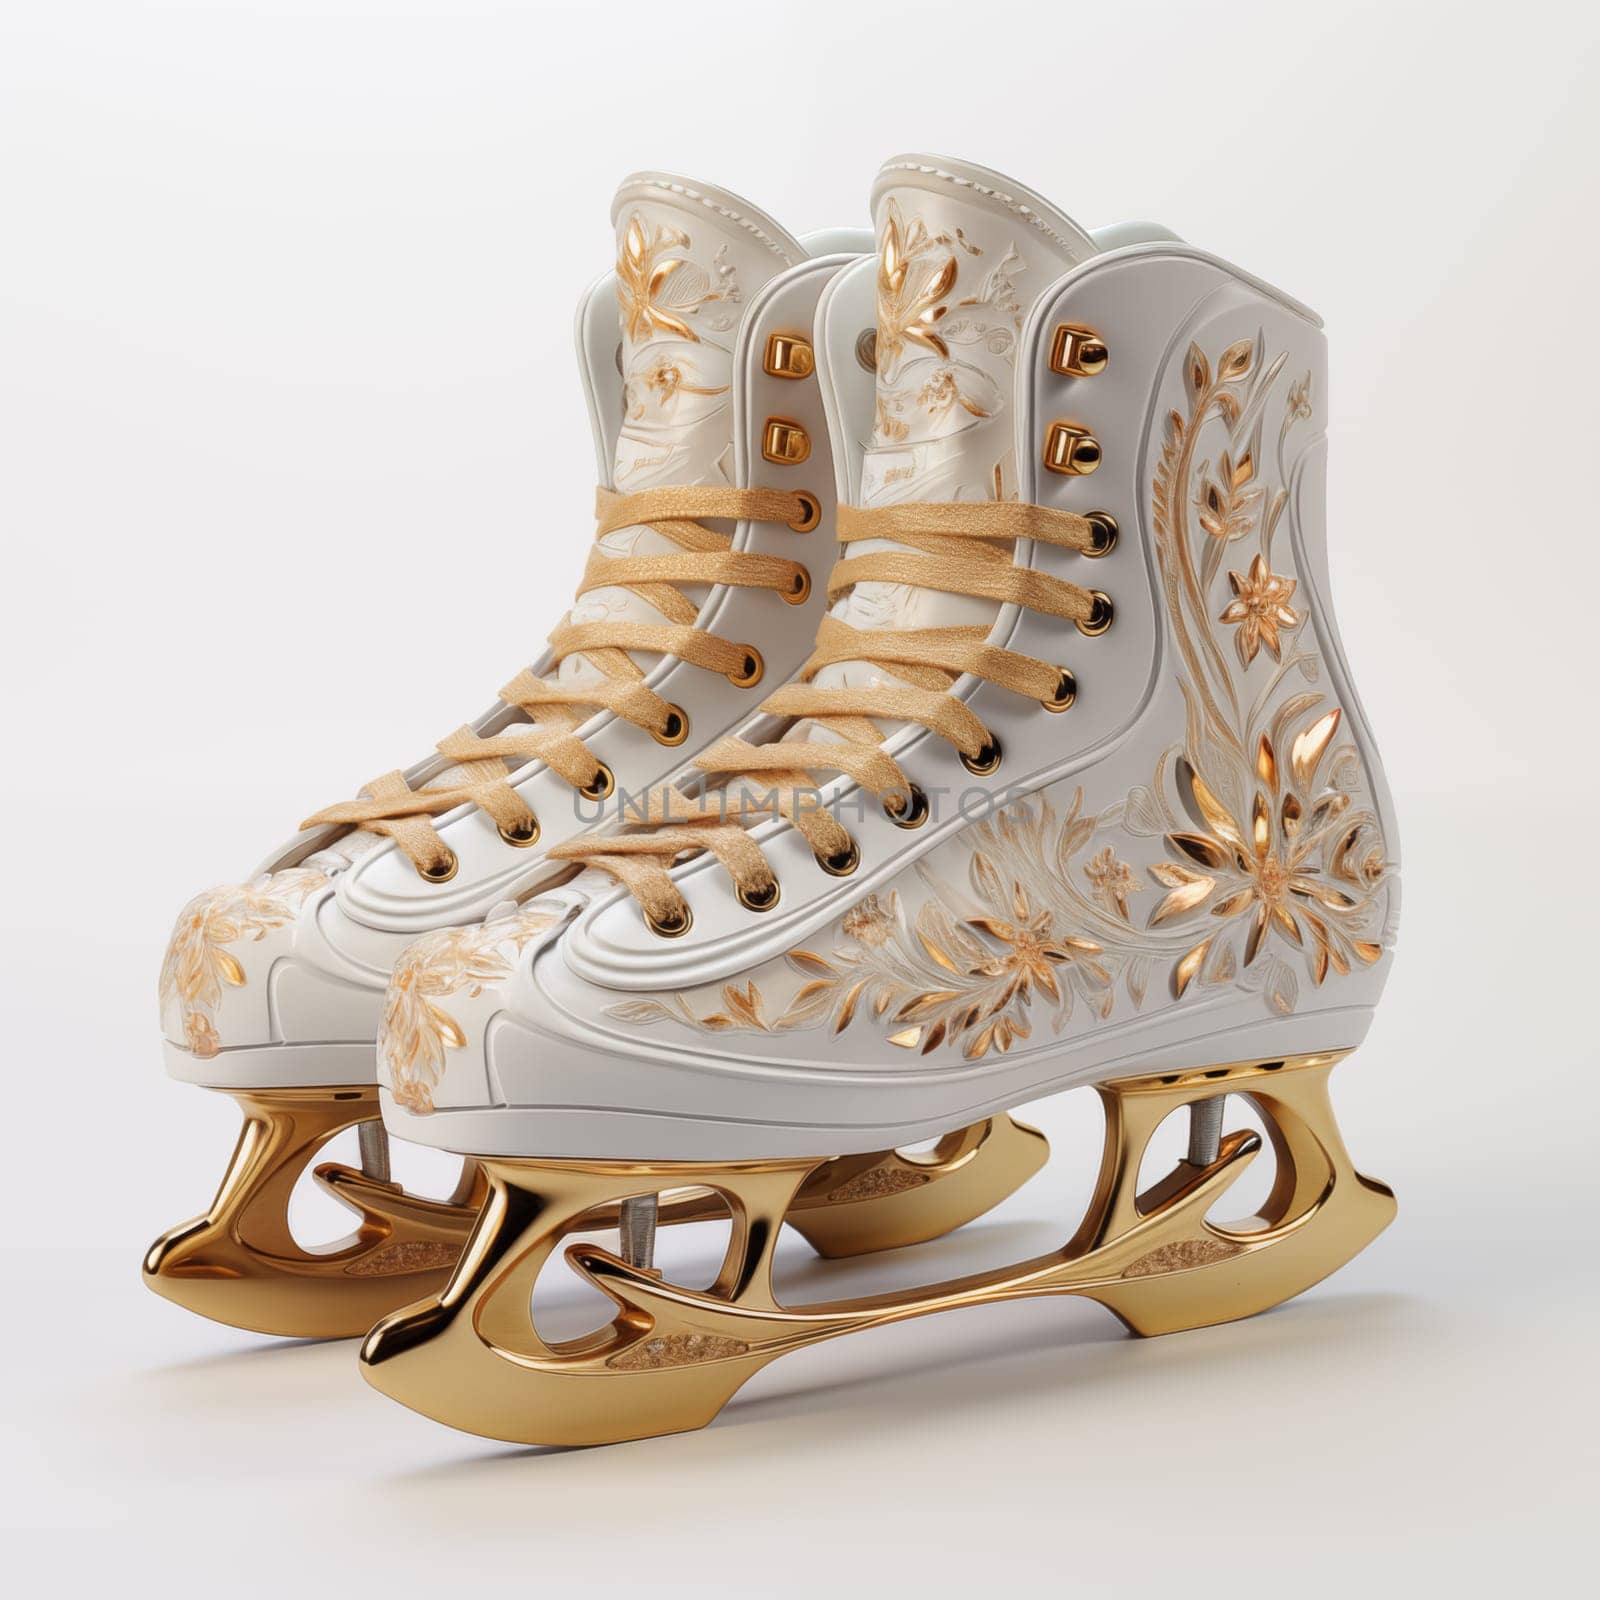 Luxurious, white with gold pattern, ice skates, standing isolated on white background by Zakharova